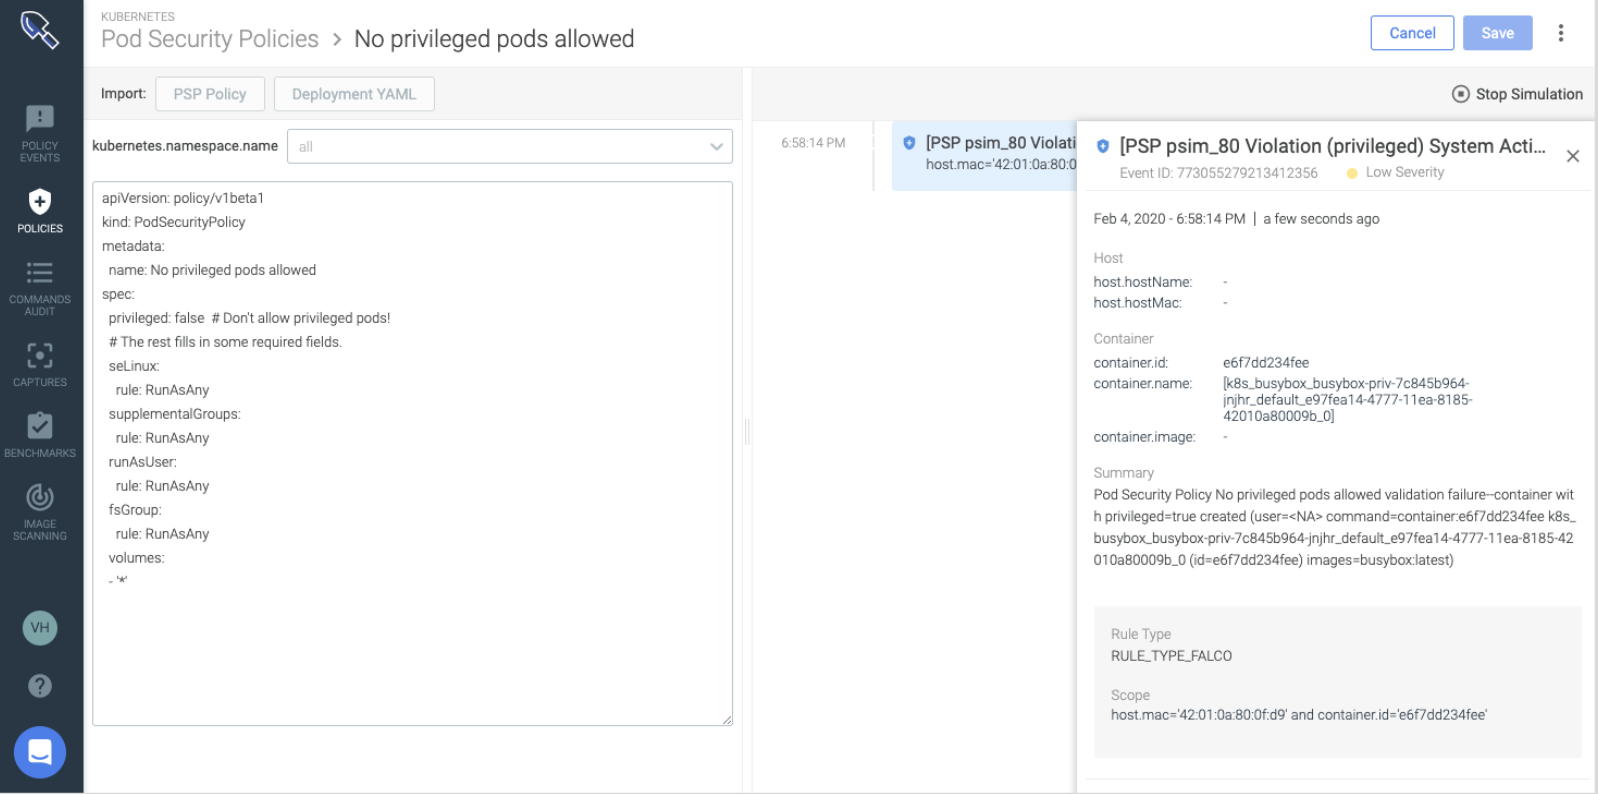 PSP advisor will help you validate your pod permissions